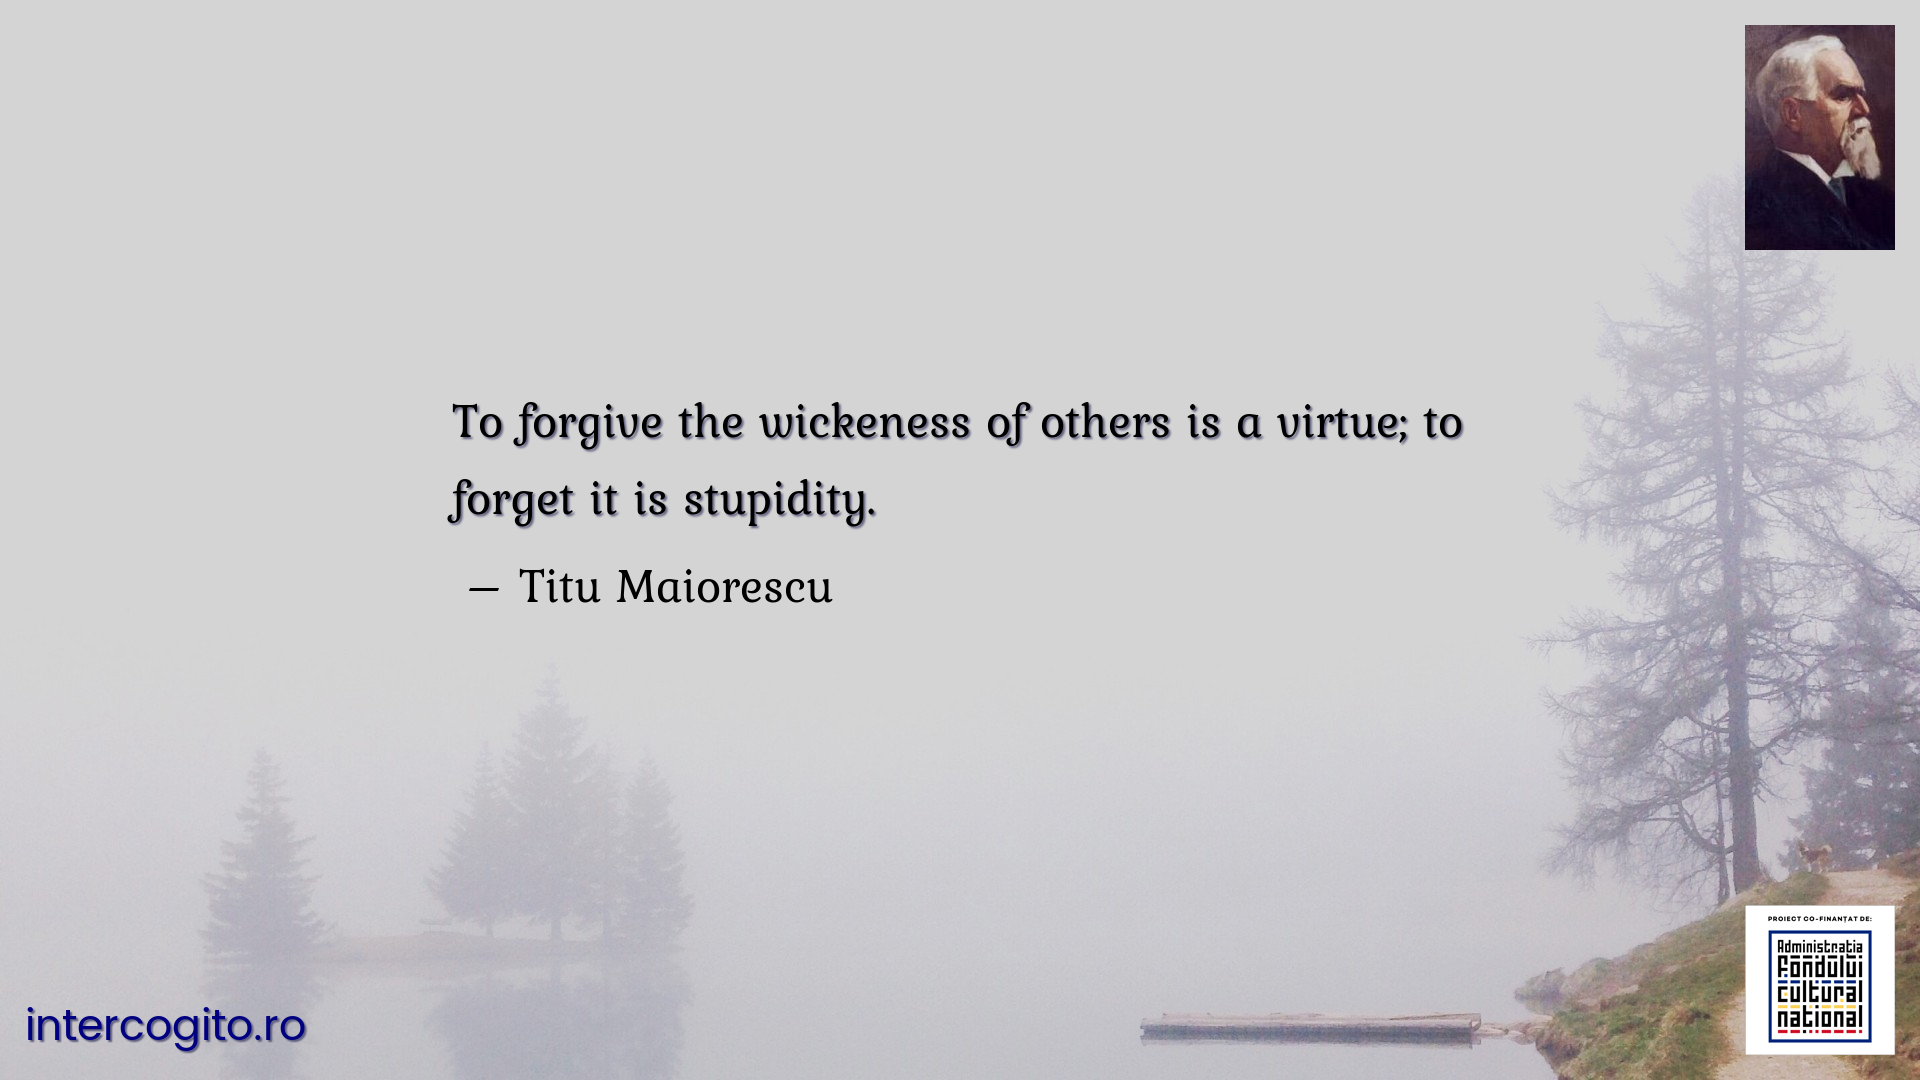 To forgive the wickeness of others is a virtue; to forget it is stupidity.